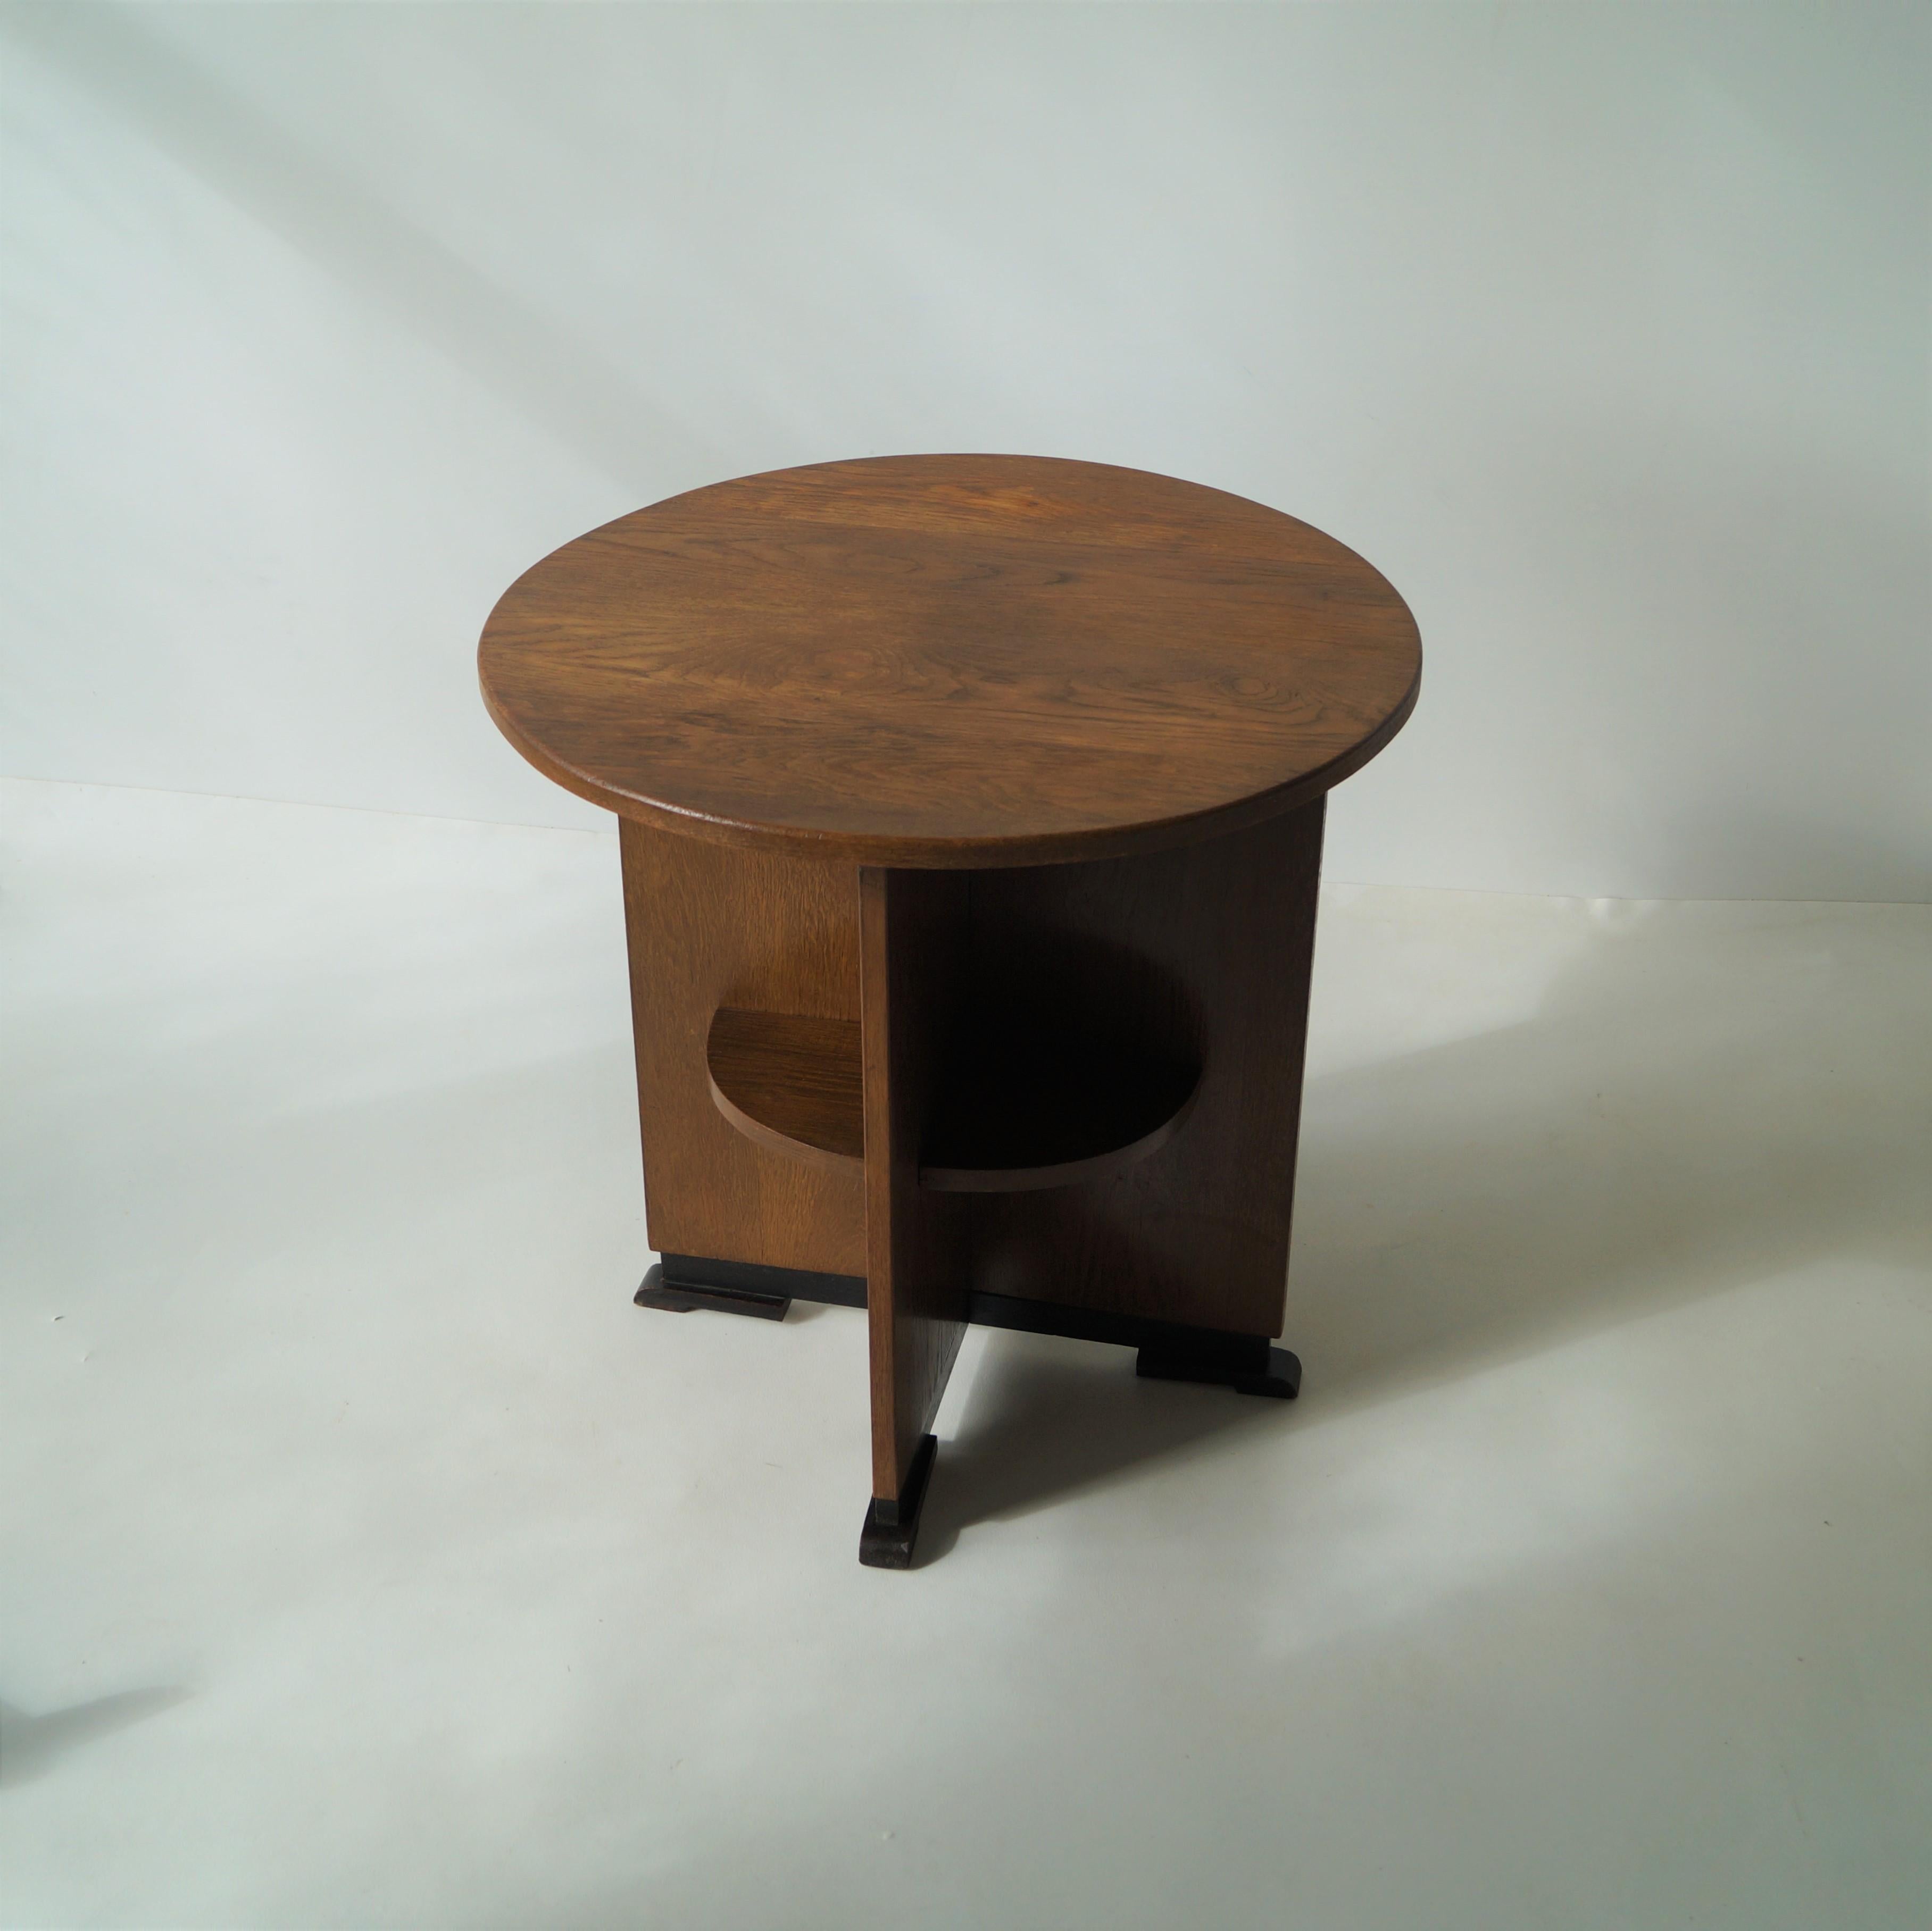 Dutch Art Deco (Haagse School) Occasional Table with Modernist Lines, 1920s 8